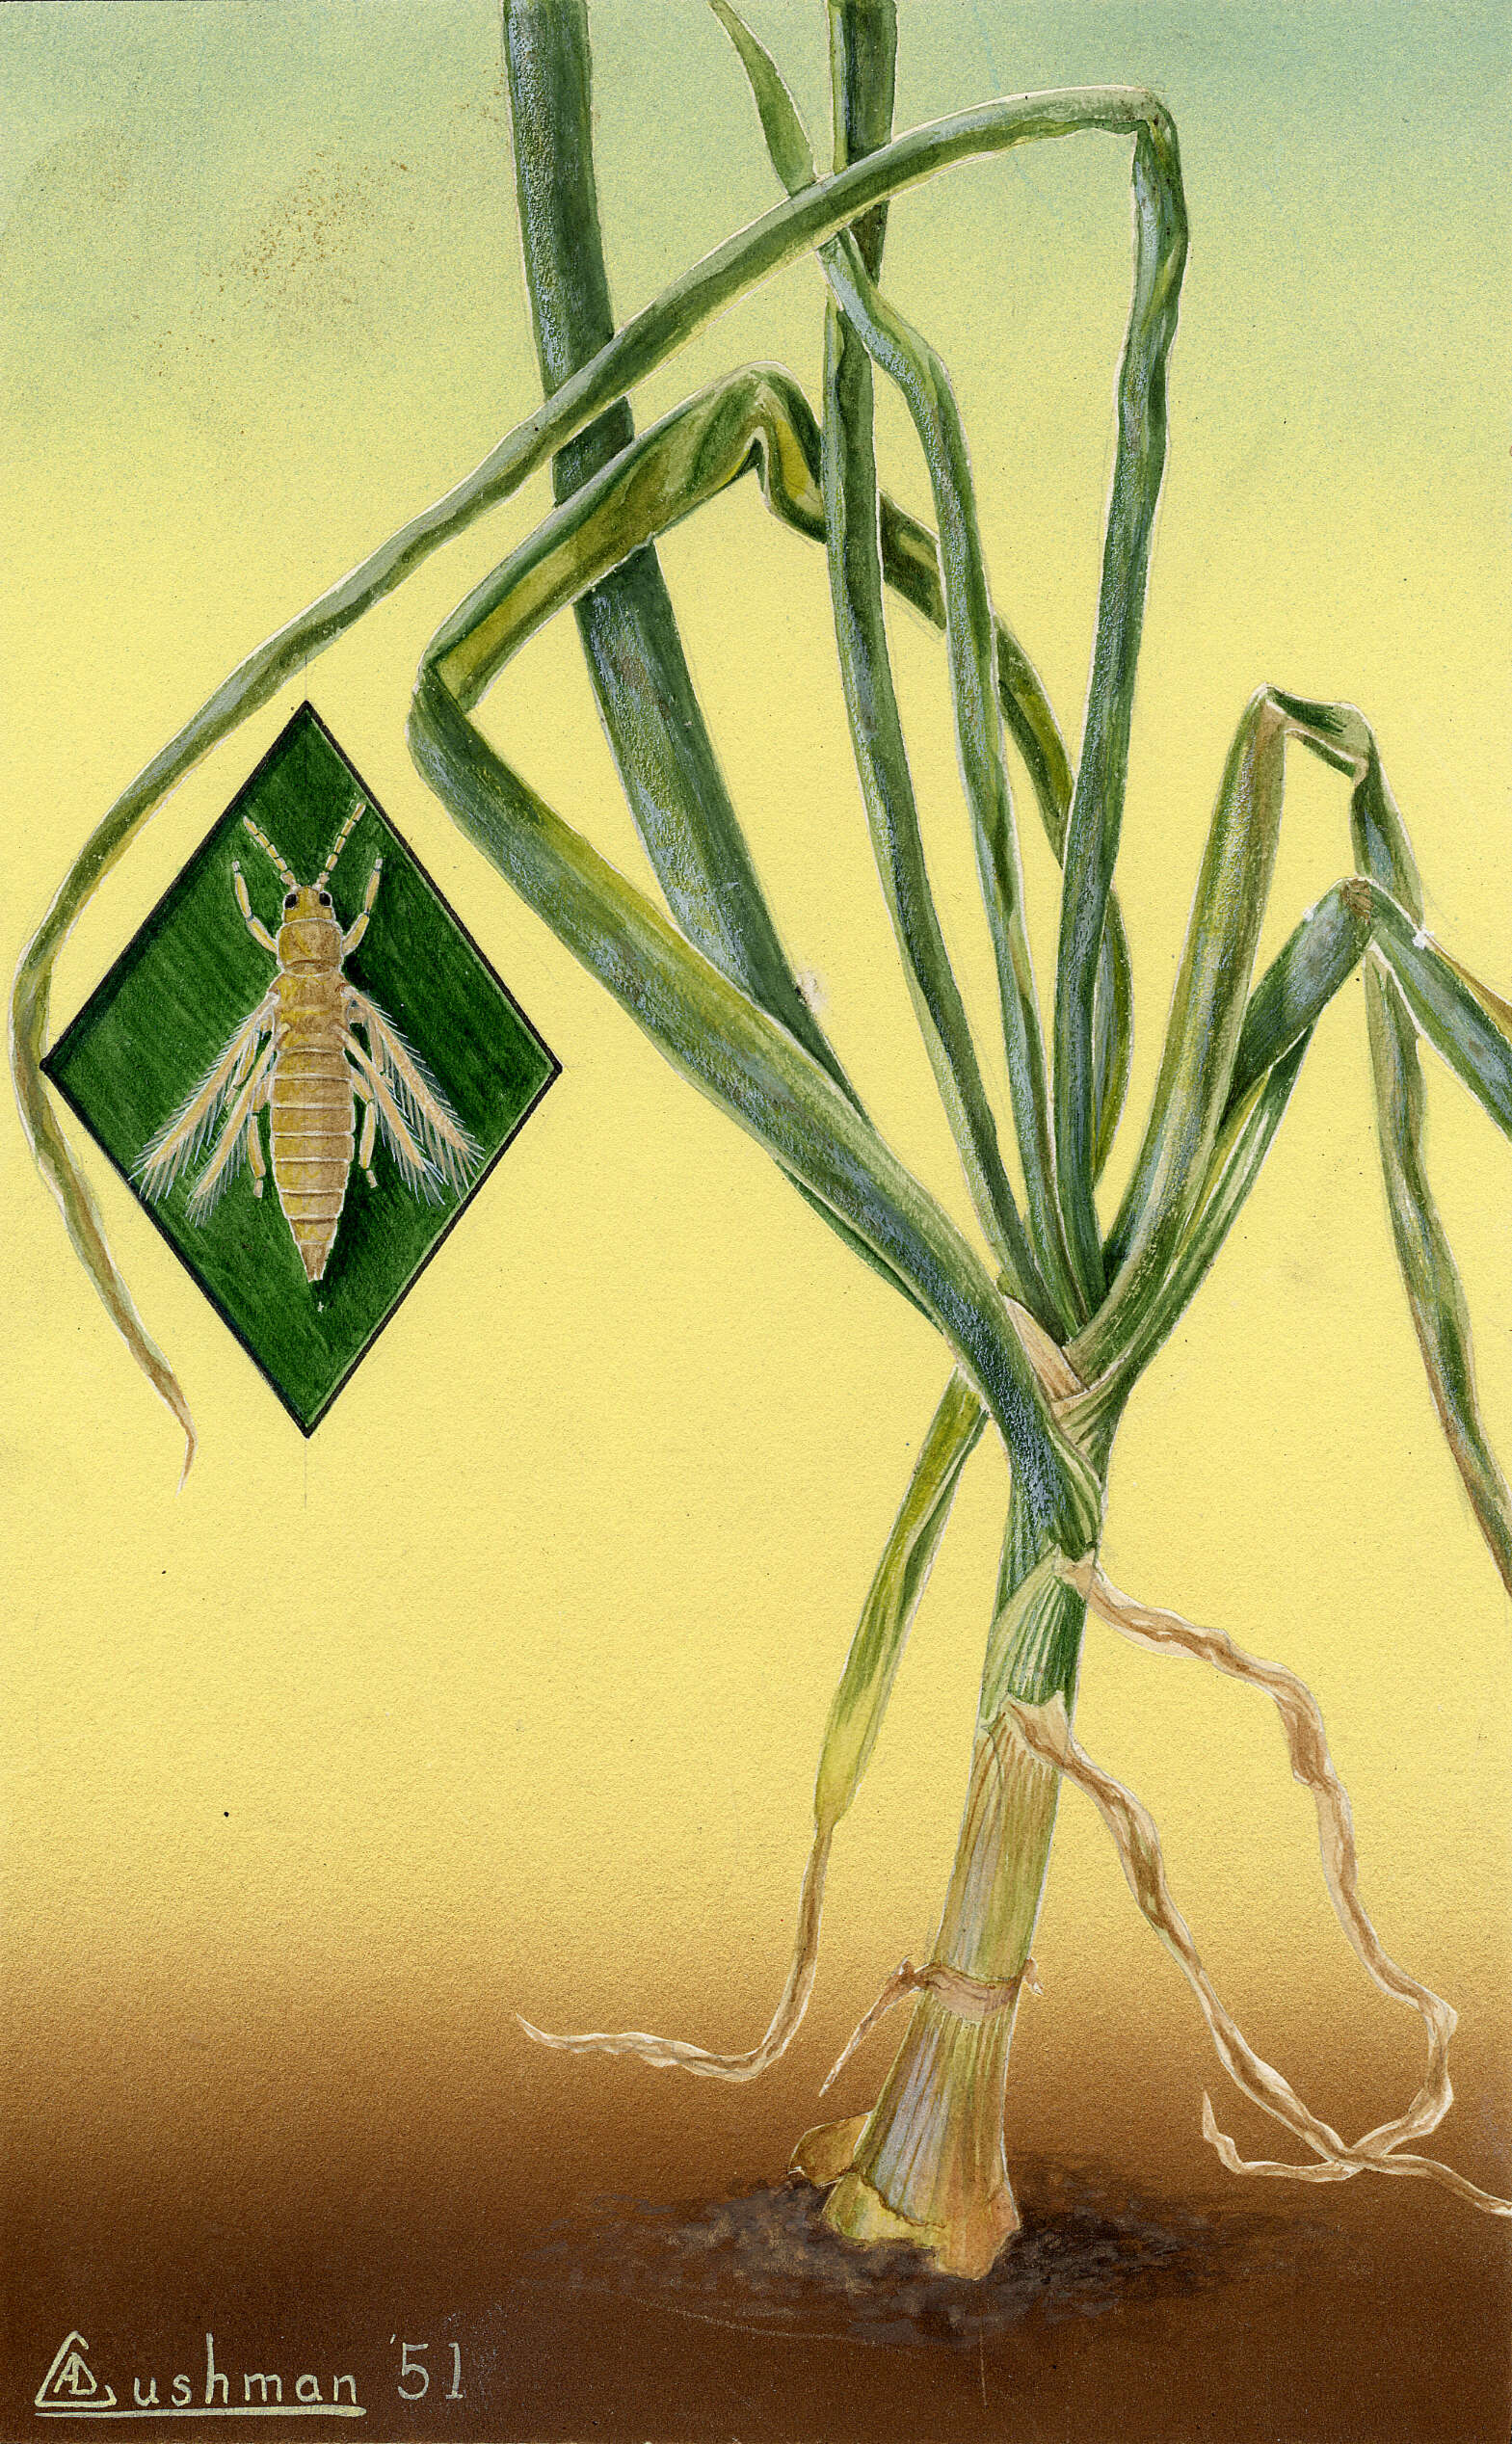 Image of thrips